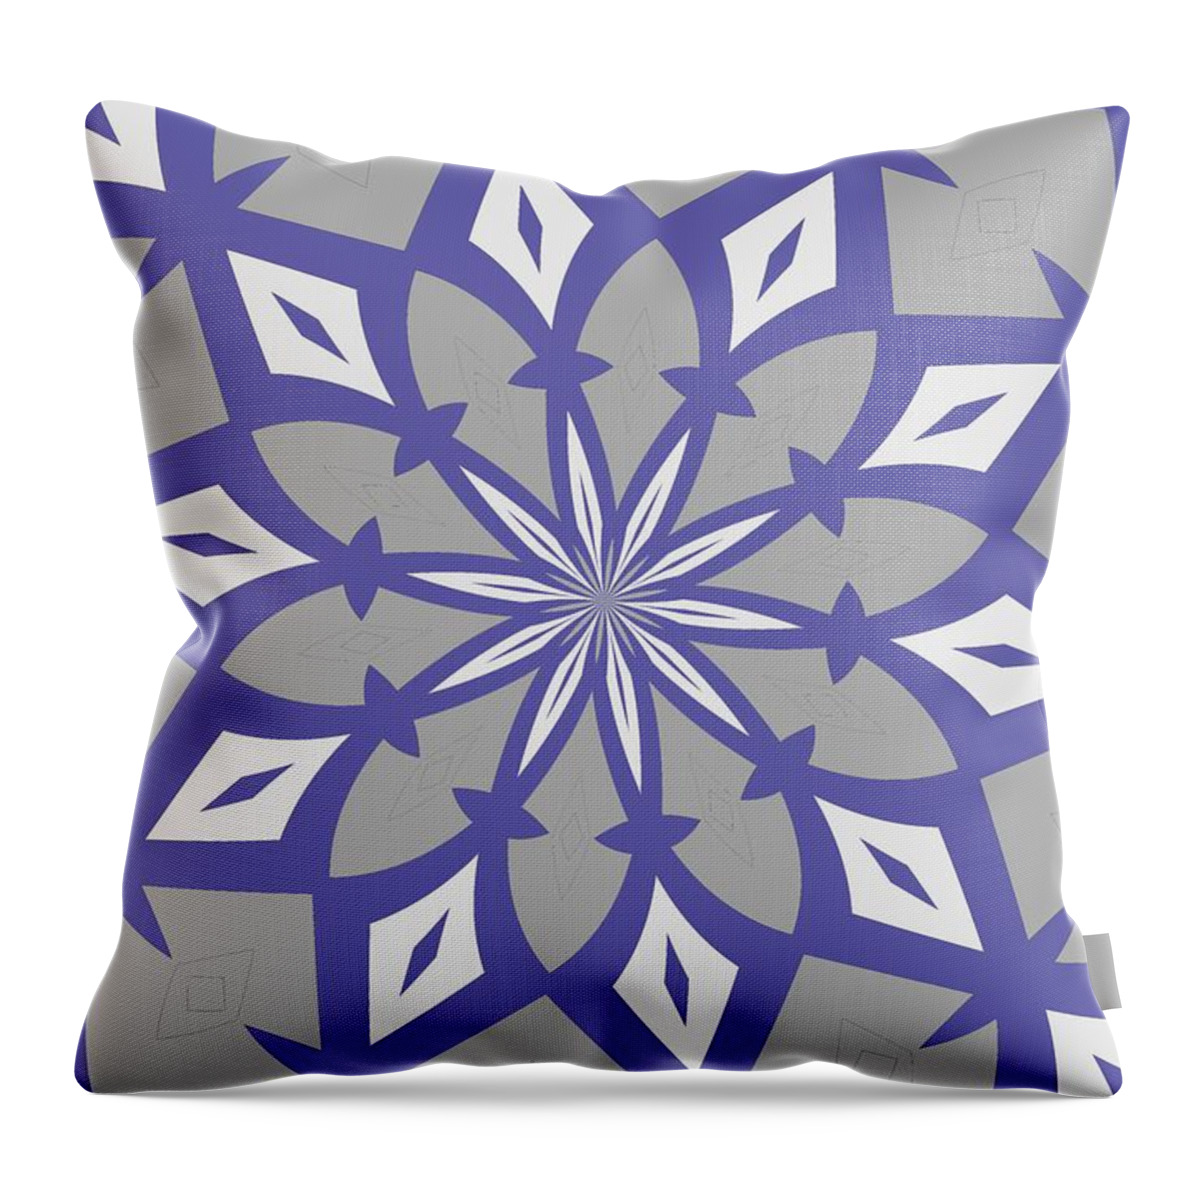 Grey Throw Pillow featuring the painting Ornament Number 12 by Alex Caminker